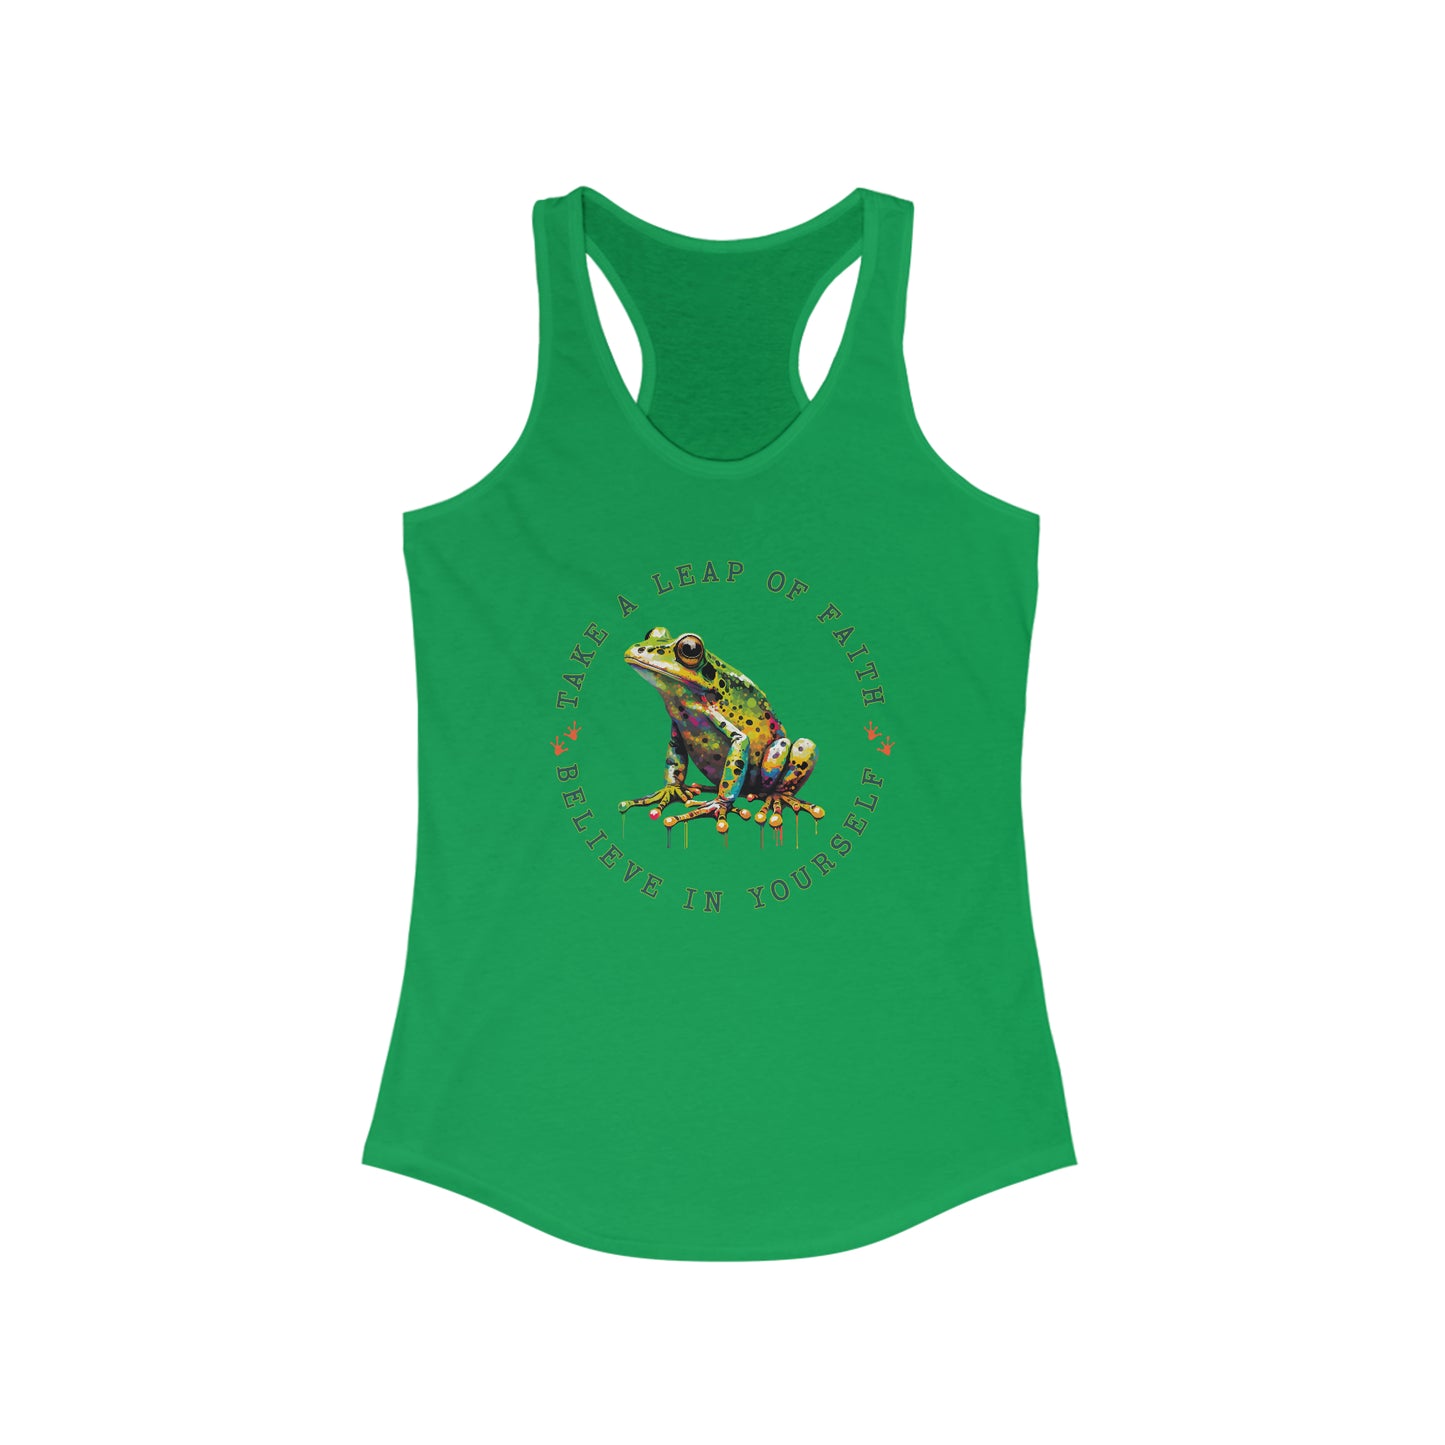 Frog Tank Top For Take A Leap Of Faith Shirt For Believe In Yourself Shirt For Lucky Frog Tank Top For Woman Tank Top With Cute Frog Shirt For Gift